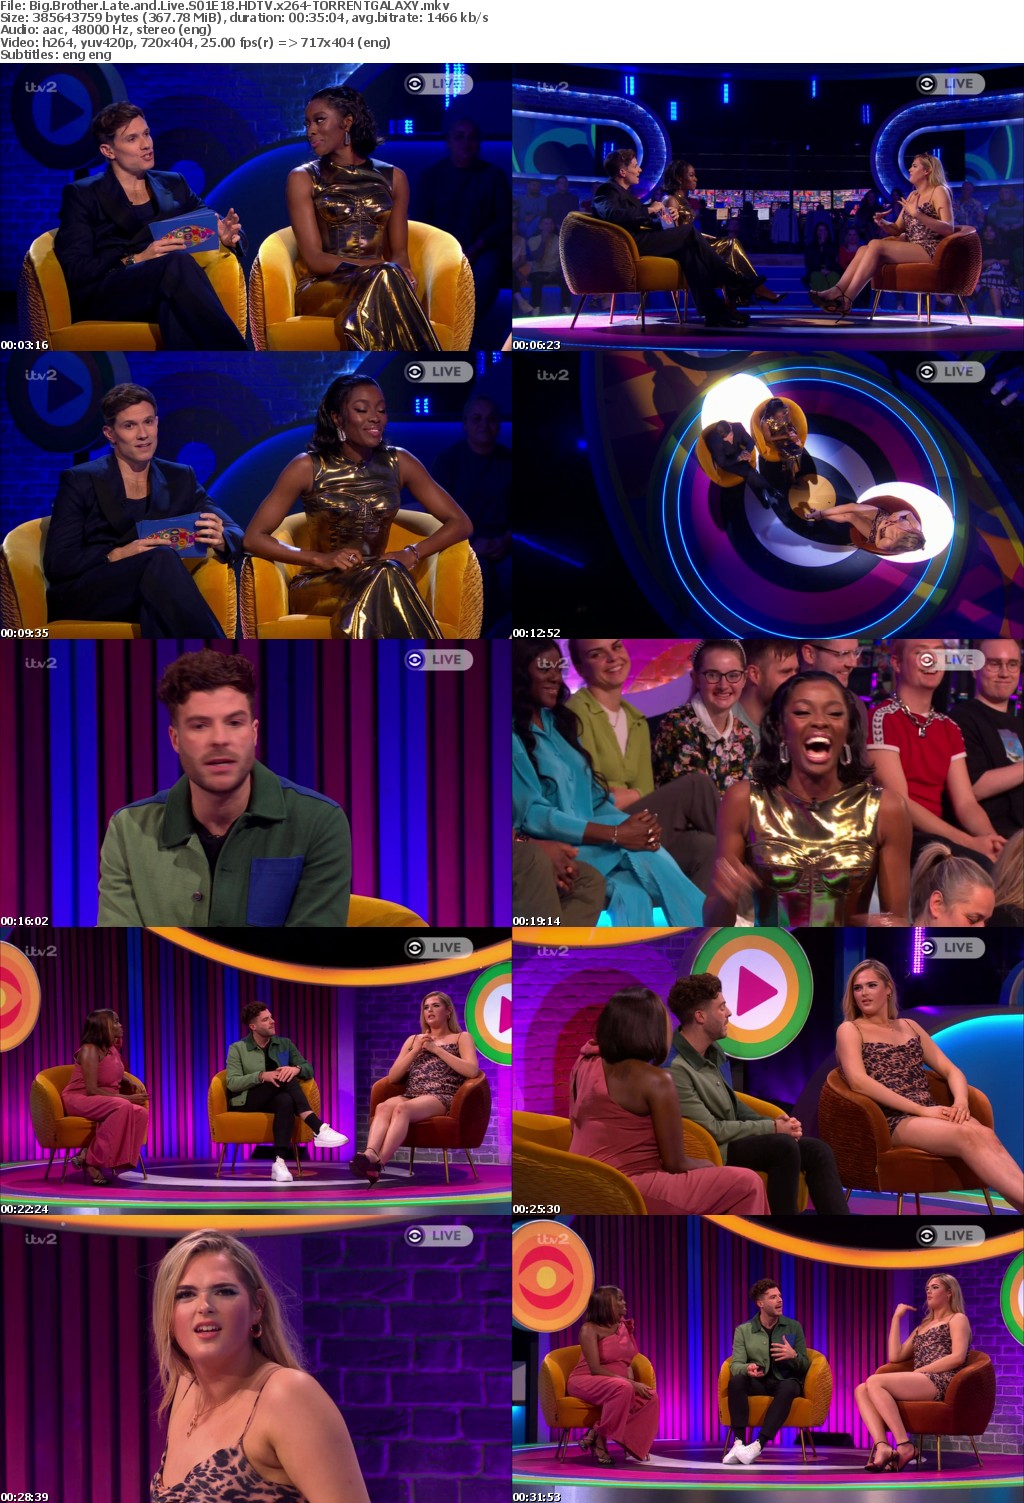 Big Brother Late and Live S01E18 HDTV x264-GALAXY